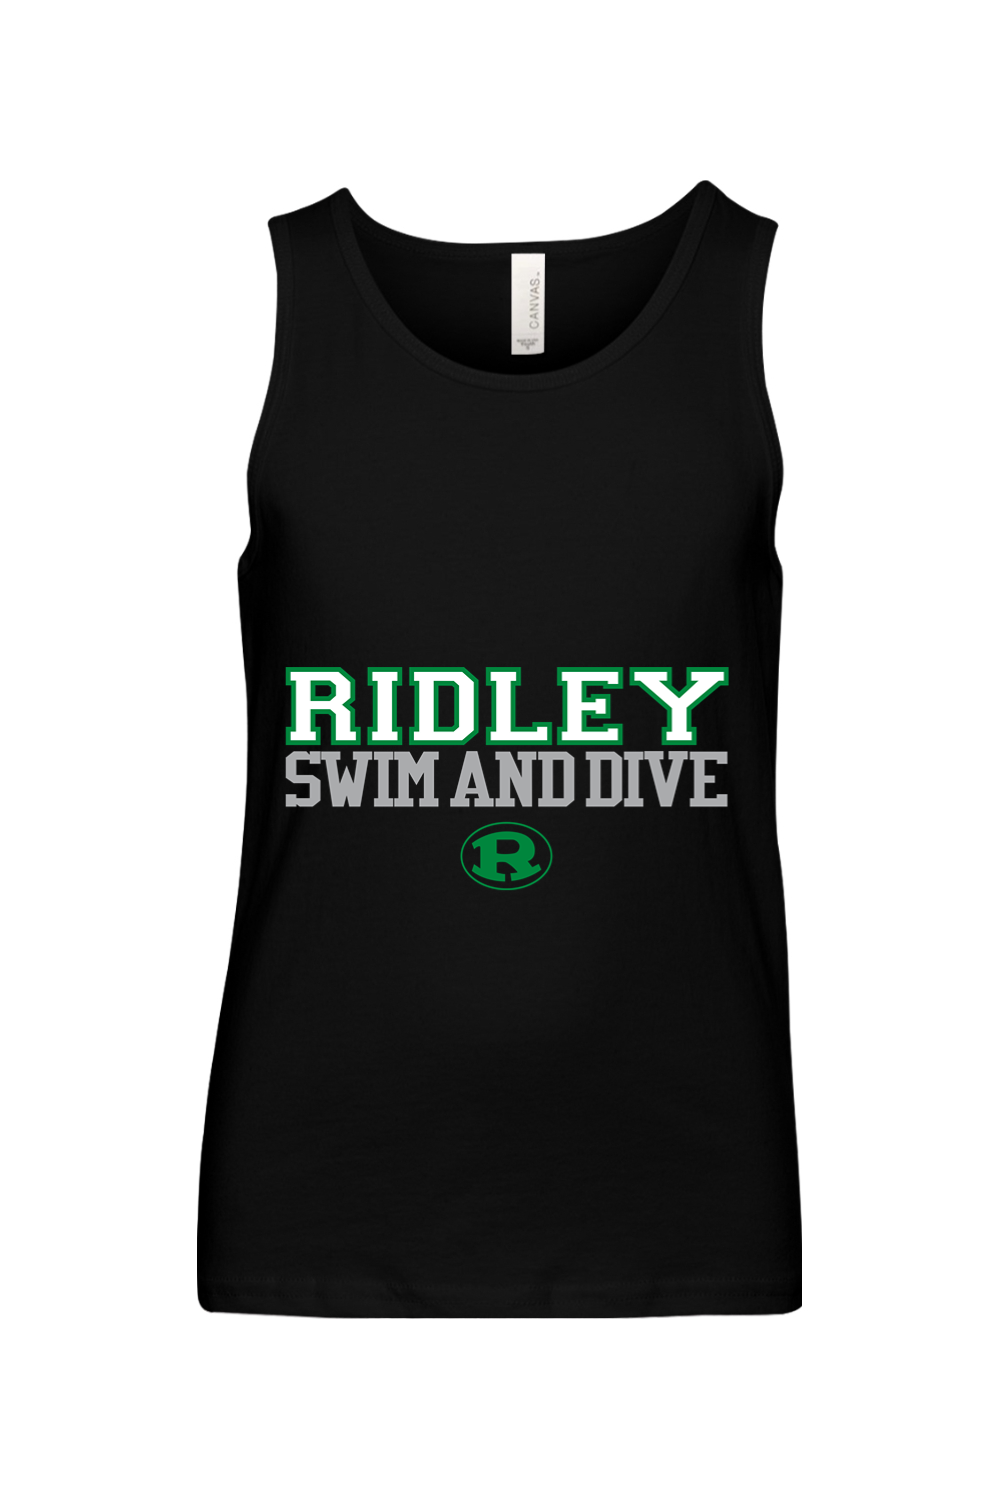 Ridley Swim and Dive Youth Jersey Tank